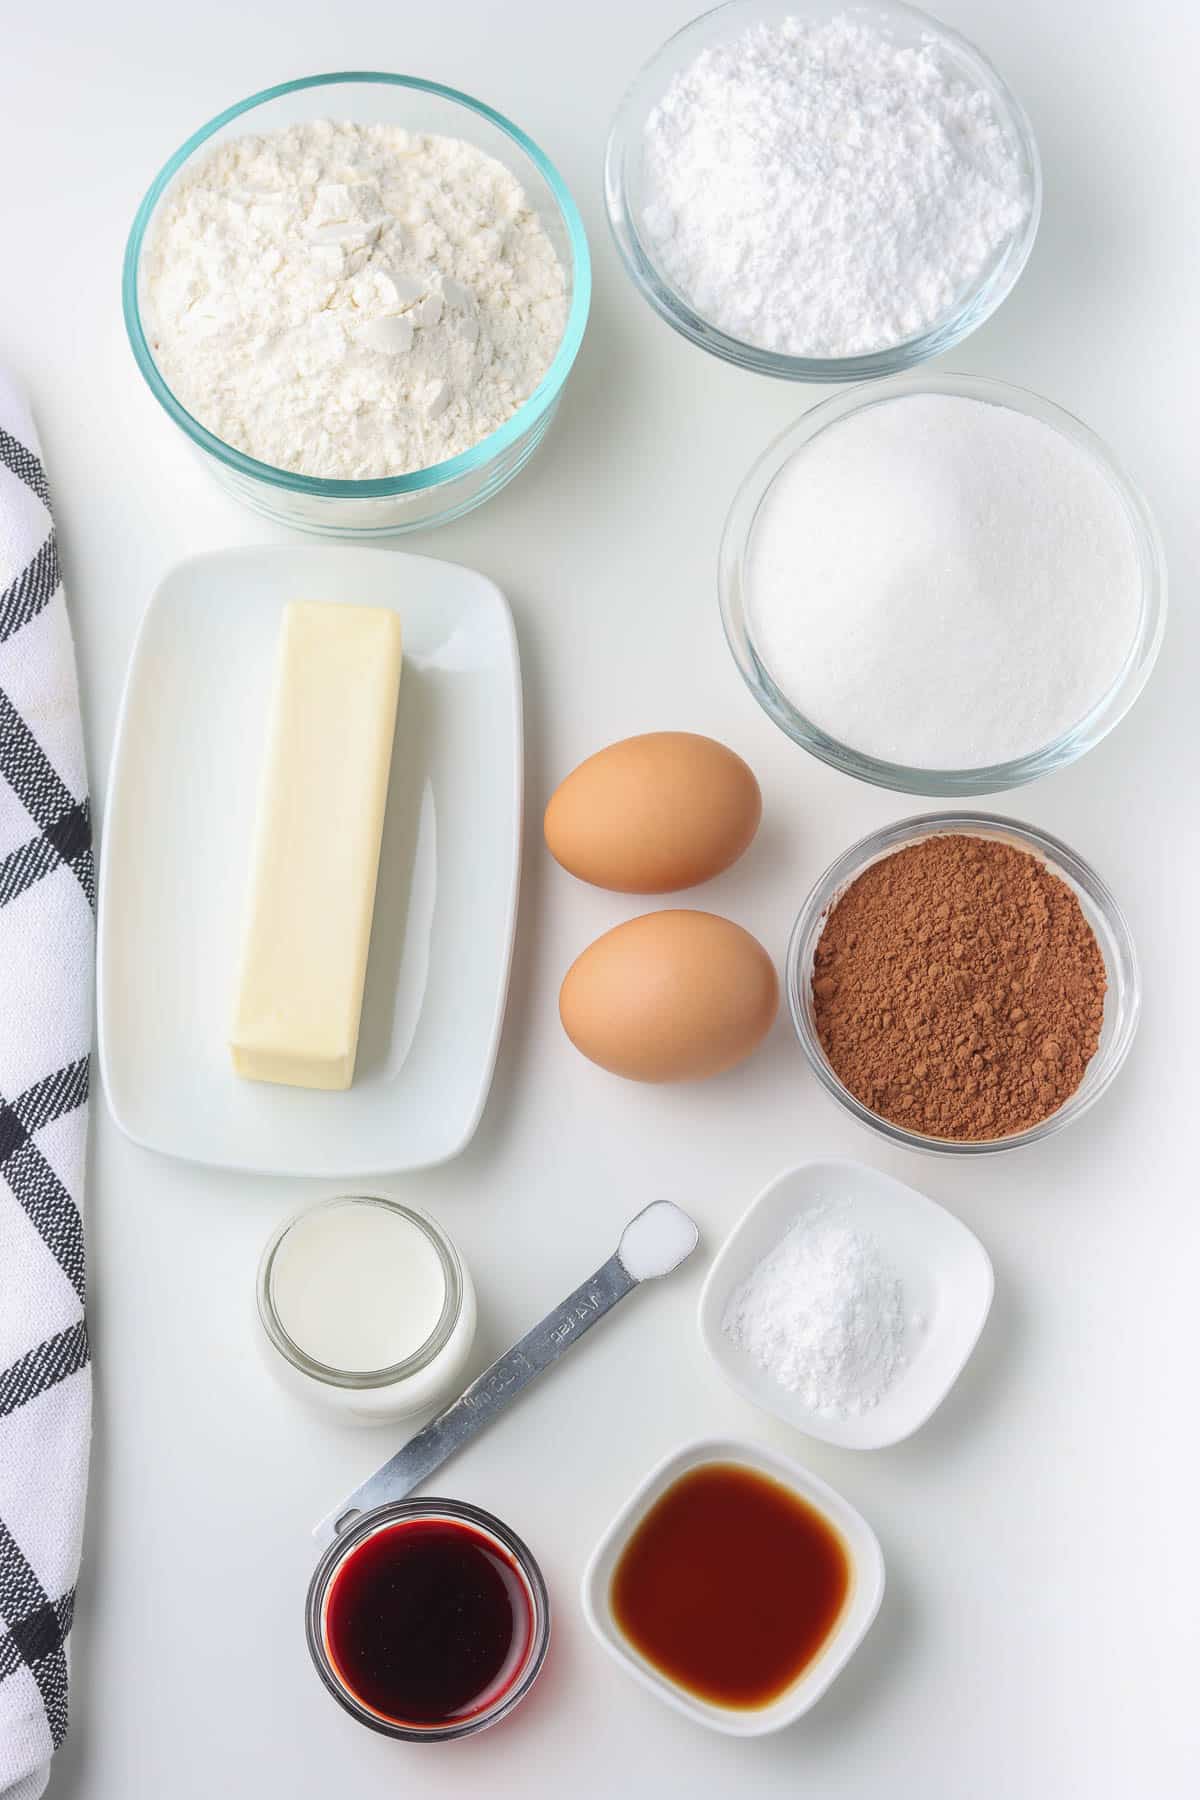 several white bowls with ingredients for red velvet cookies - flour, sugar, cocoa, vanilla extract, stick of butter, baking powder, milk, two eggs, and powdered sugar.